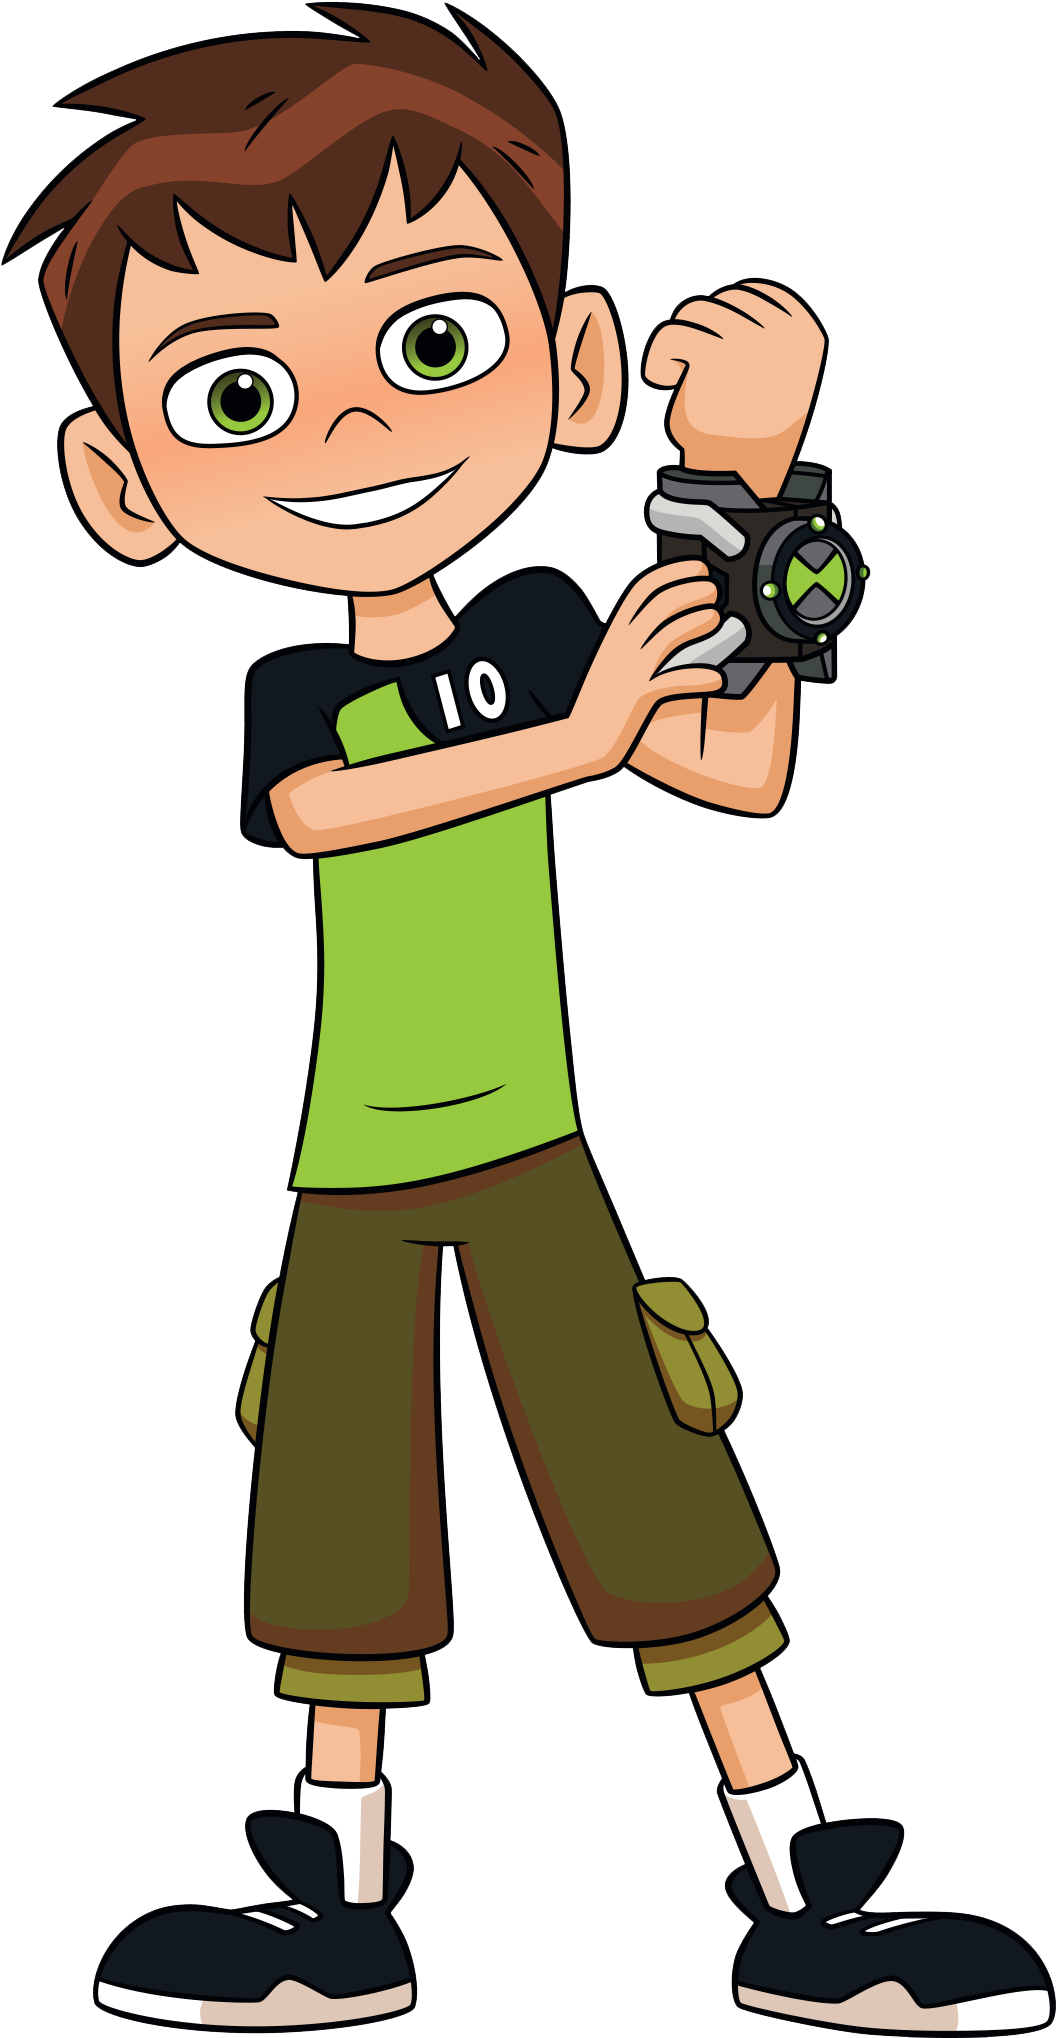 Ben 10' Reboot in the Works at Cartoon Network – The Hollywood Reporter